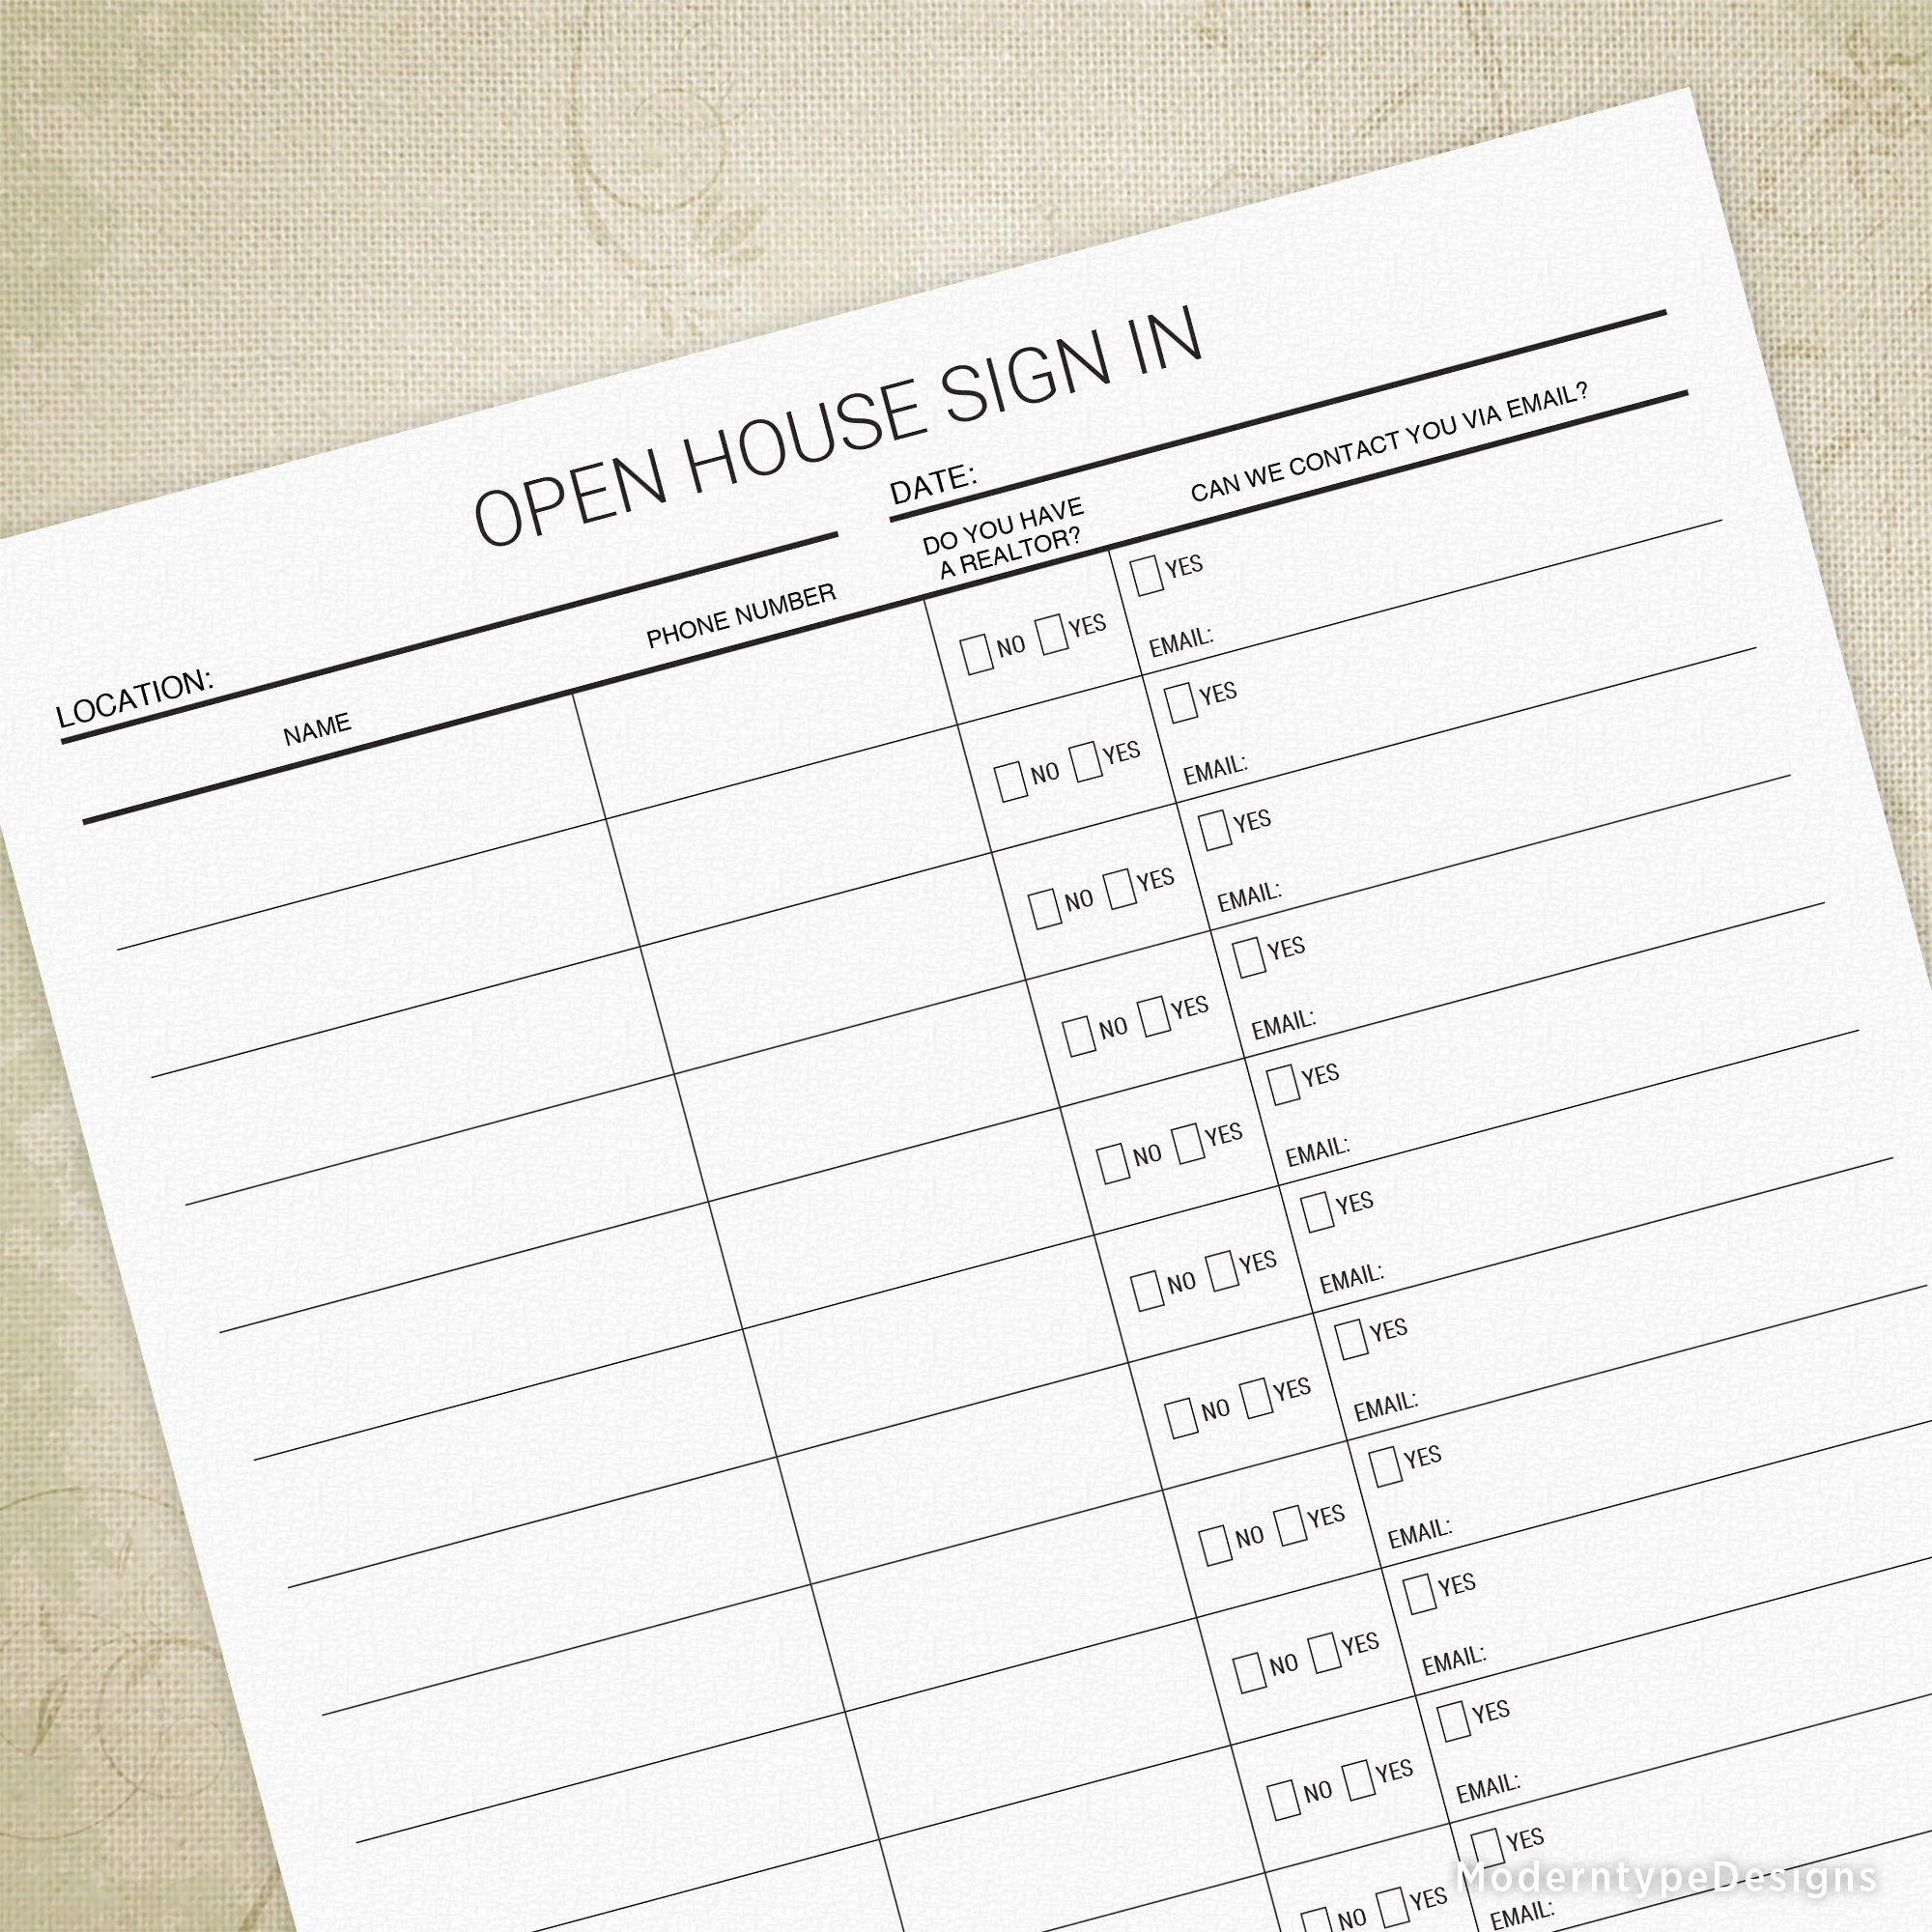 Realtor's Sign In Sheet Printable, Personalized